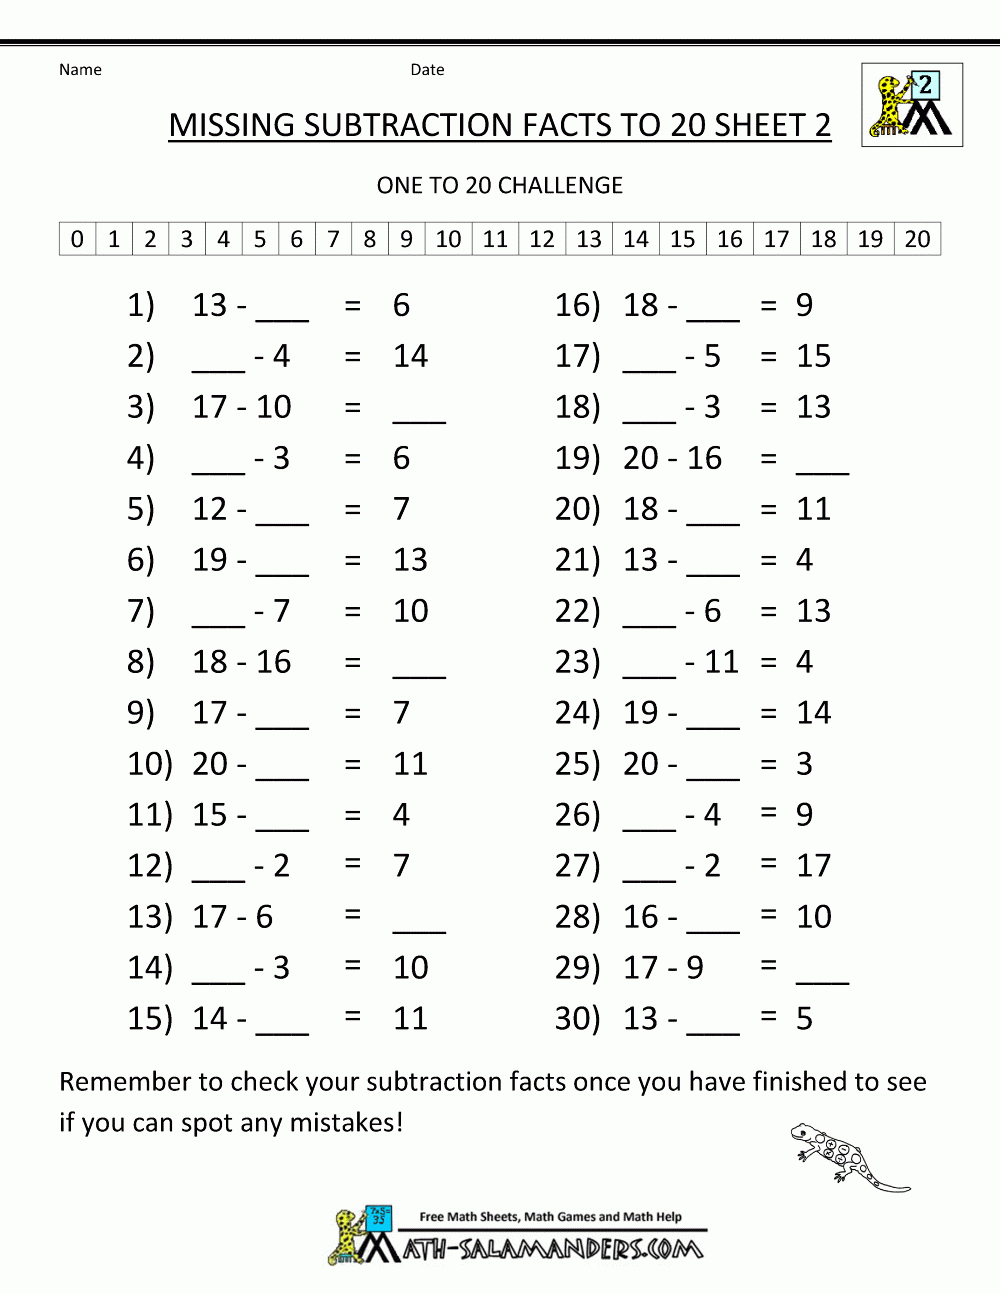 Math Worksheets For 2Nd Grade Missing Subtraction Facts To 20 2 - Free Printable Activity Sheets For 2Nd Grade